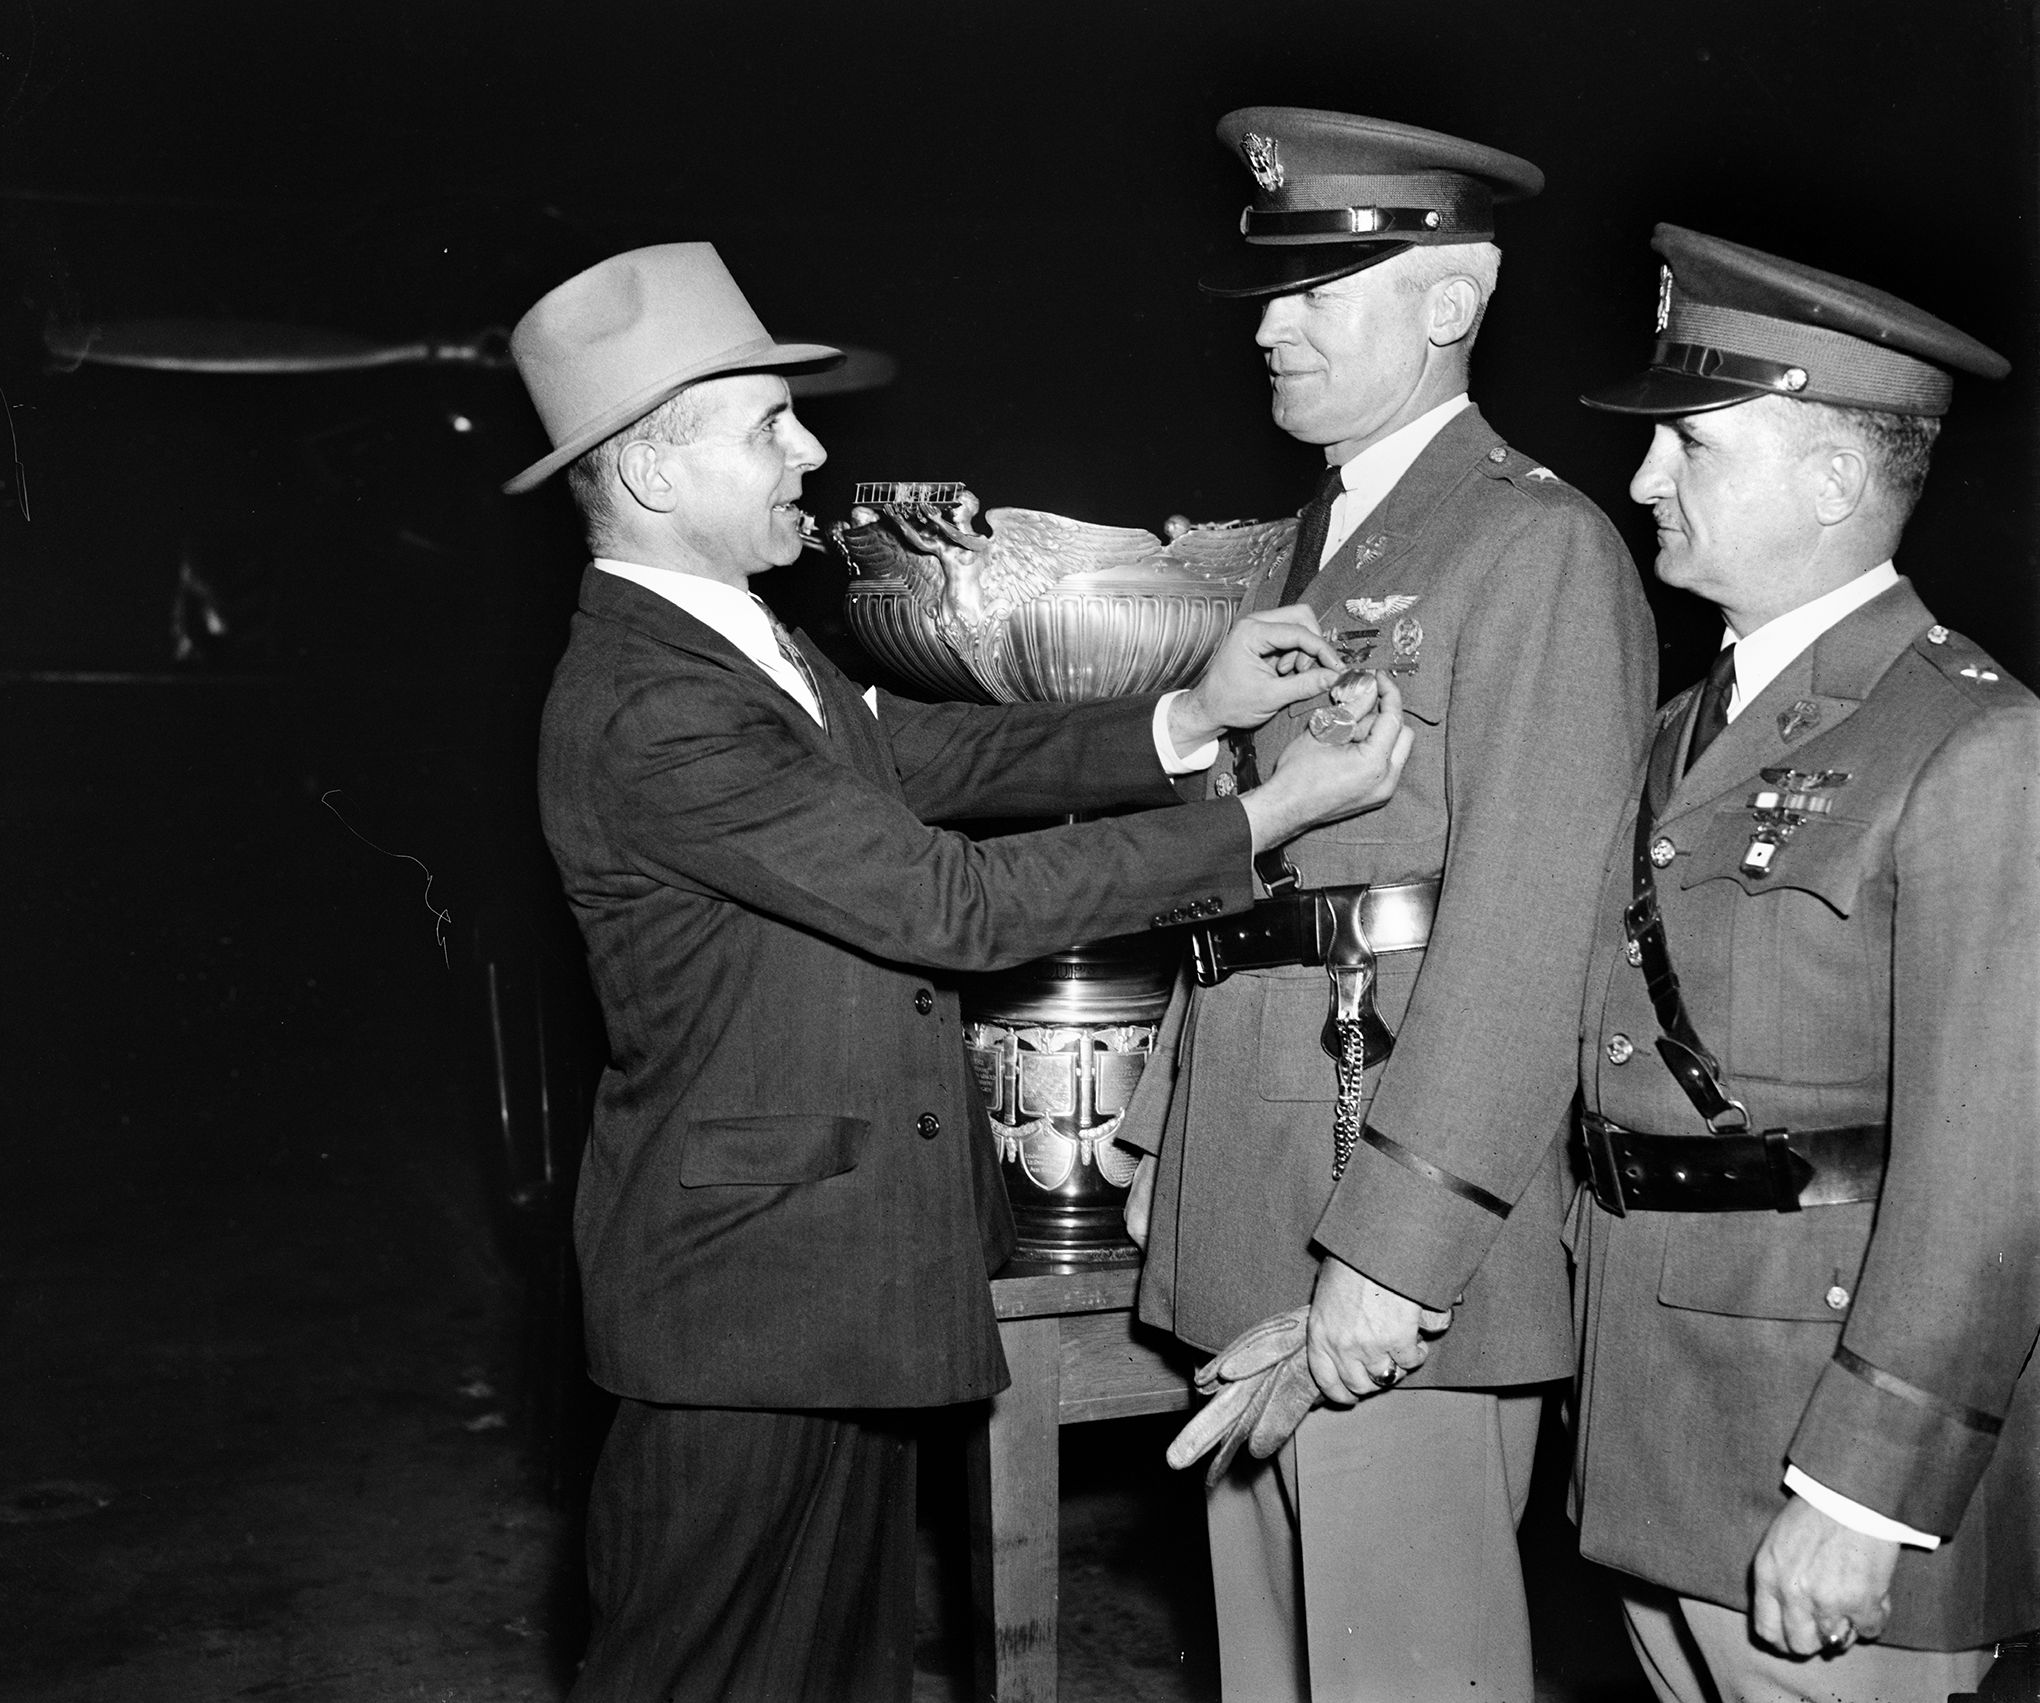 In this photograph from April 1935, Major Jimmy Doolittle (left), vice president of the National Aeronautic Association, presents Brigadier General Henry “Hap” Arnold a gold medal to honor his receipt of the Mackay Trophy. Both men went on to hold high command during World War II. General Oscar Westover, assistant chief of the Army Air Corps, looks on at right.